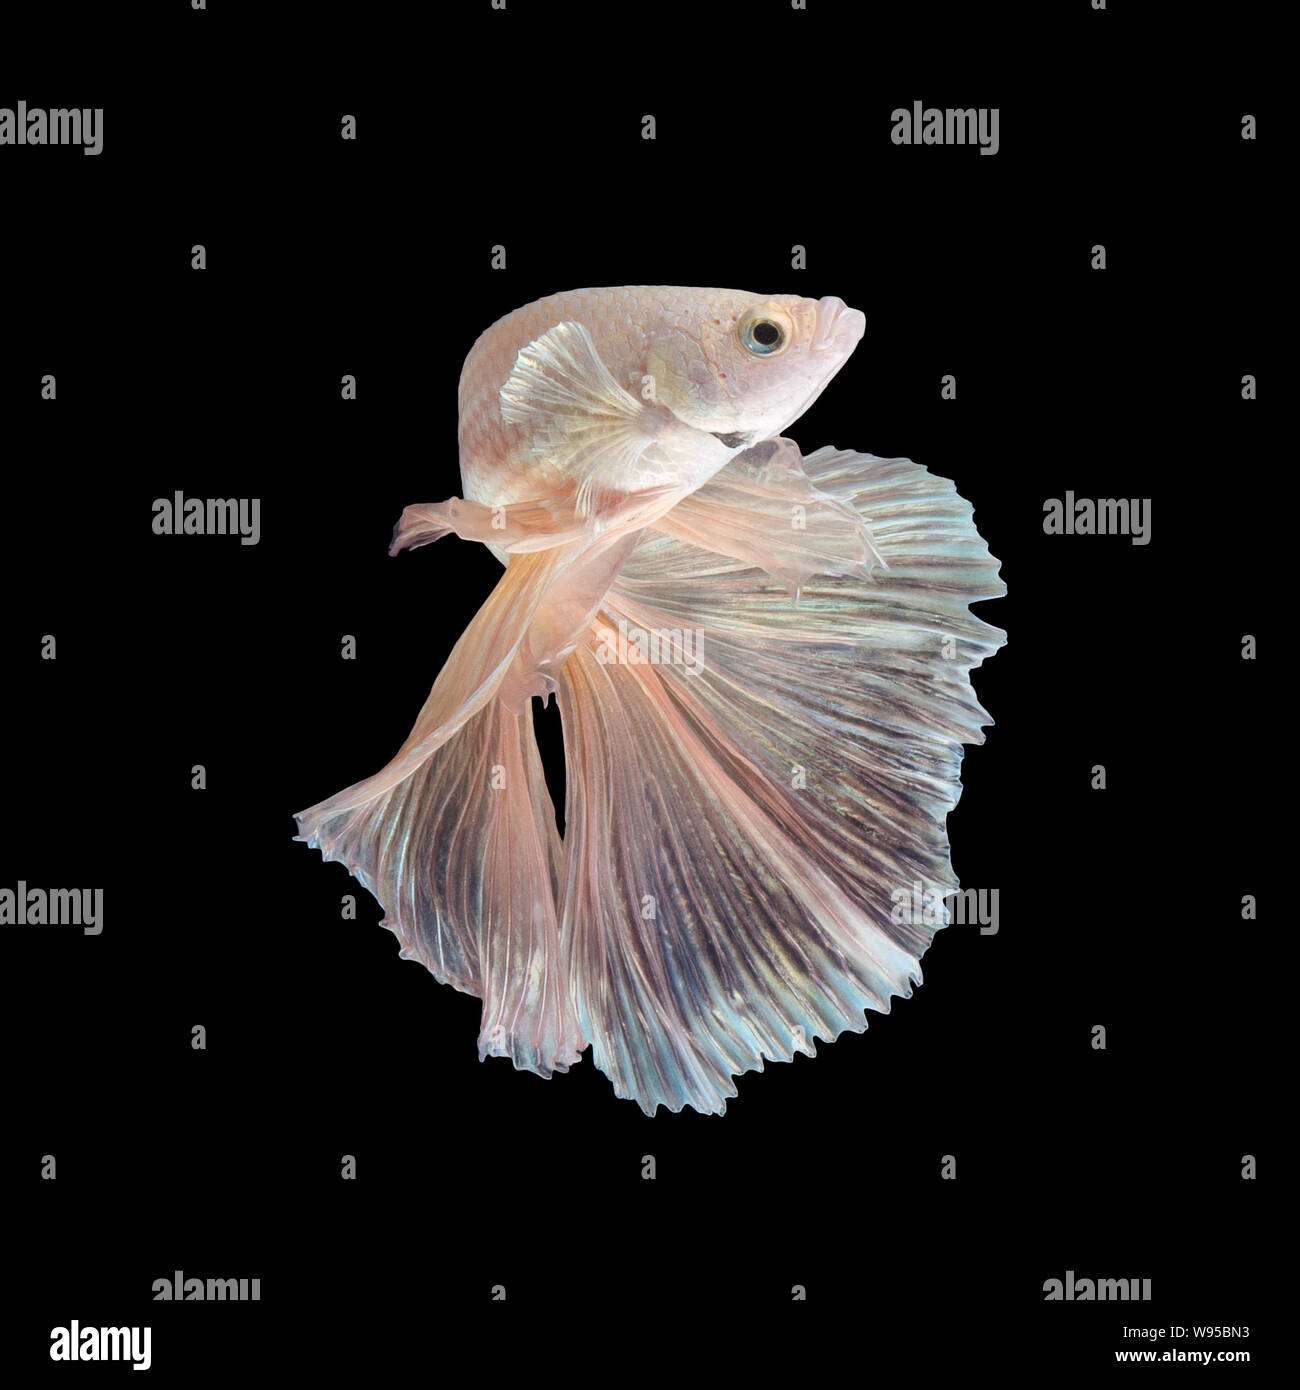 Close up art movement of Betta fish or Siamese fighting fish isolated on black background Stock Photo